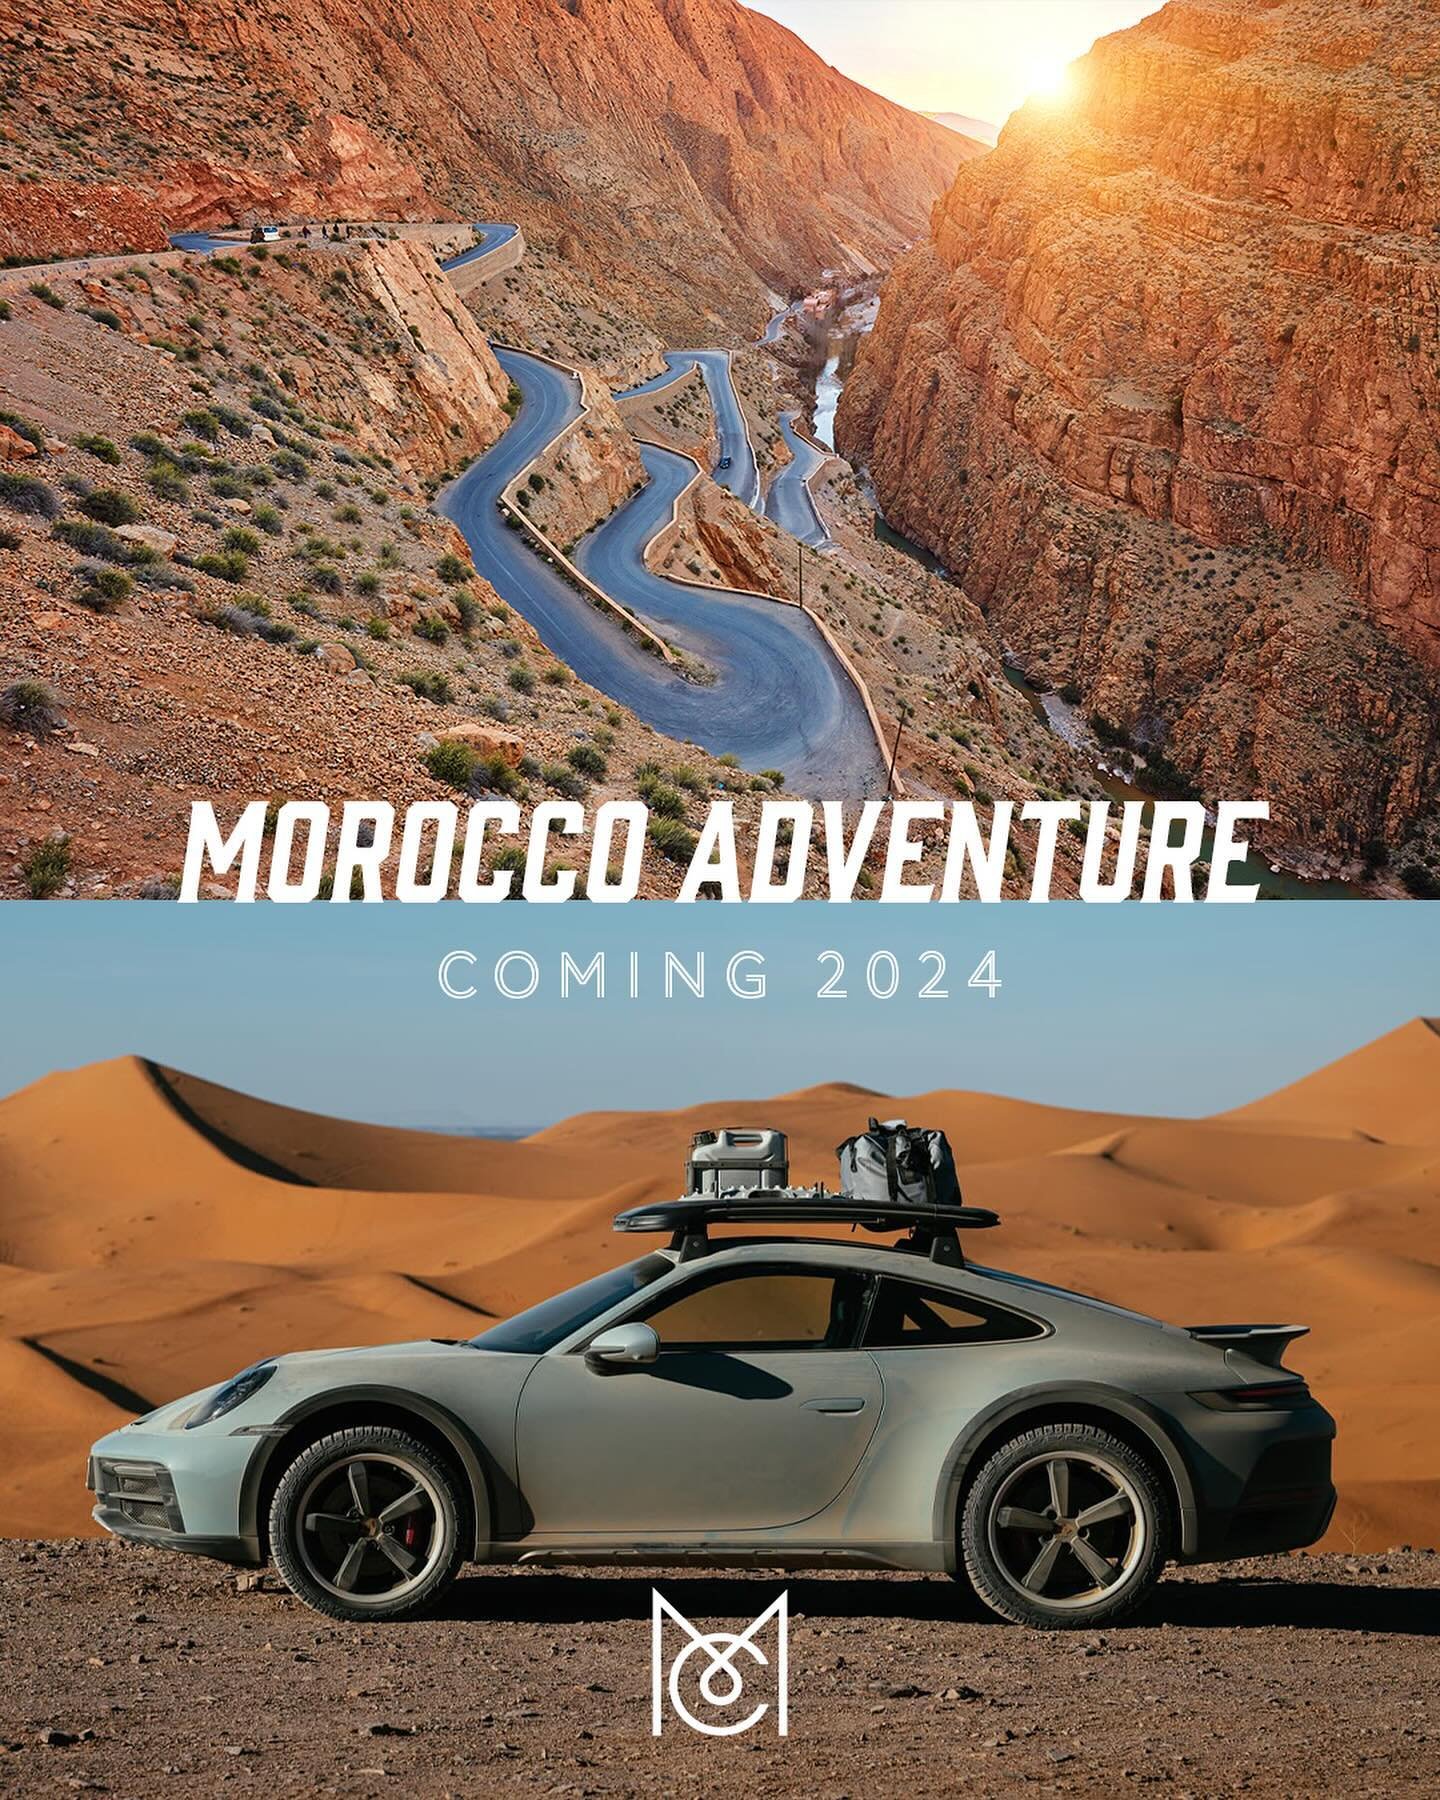 Morocco Adventure 
Do you have a Porsche Dakar, Lambo Sterrato, old 911 Safari, Ariel Nomad or even a Cayenne or Defender and you fancy taking it on a true adventure?

We are planning a trip later this year that will start in Marbella (we can transpo